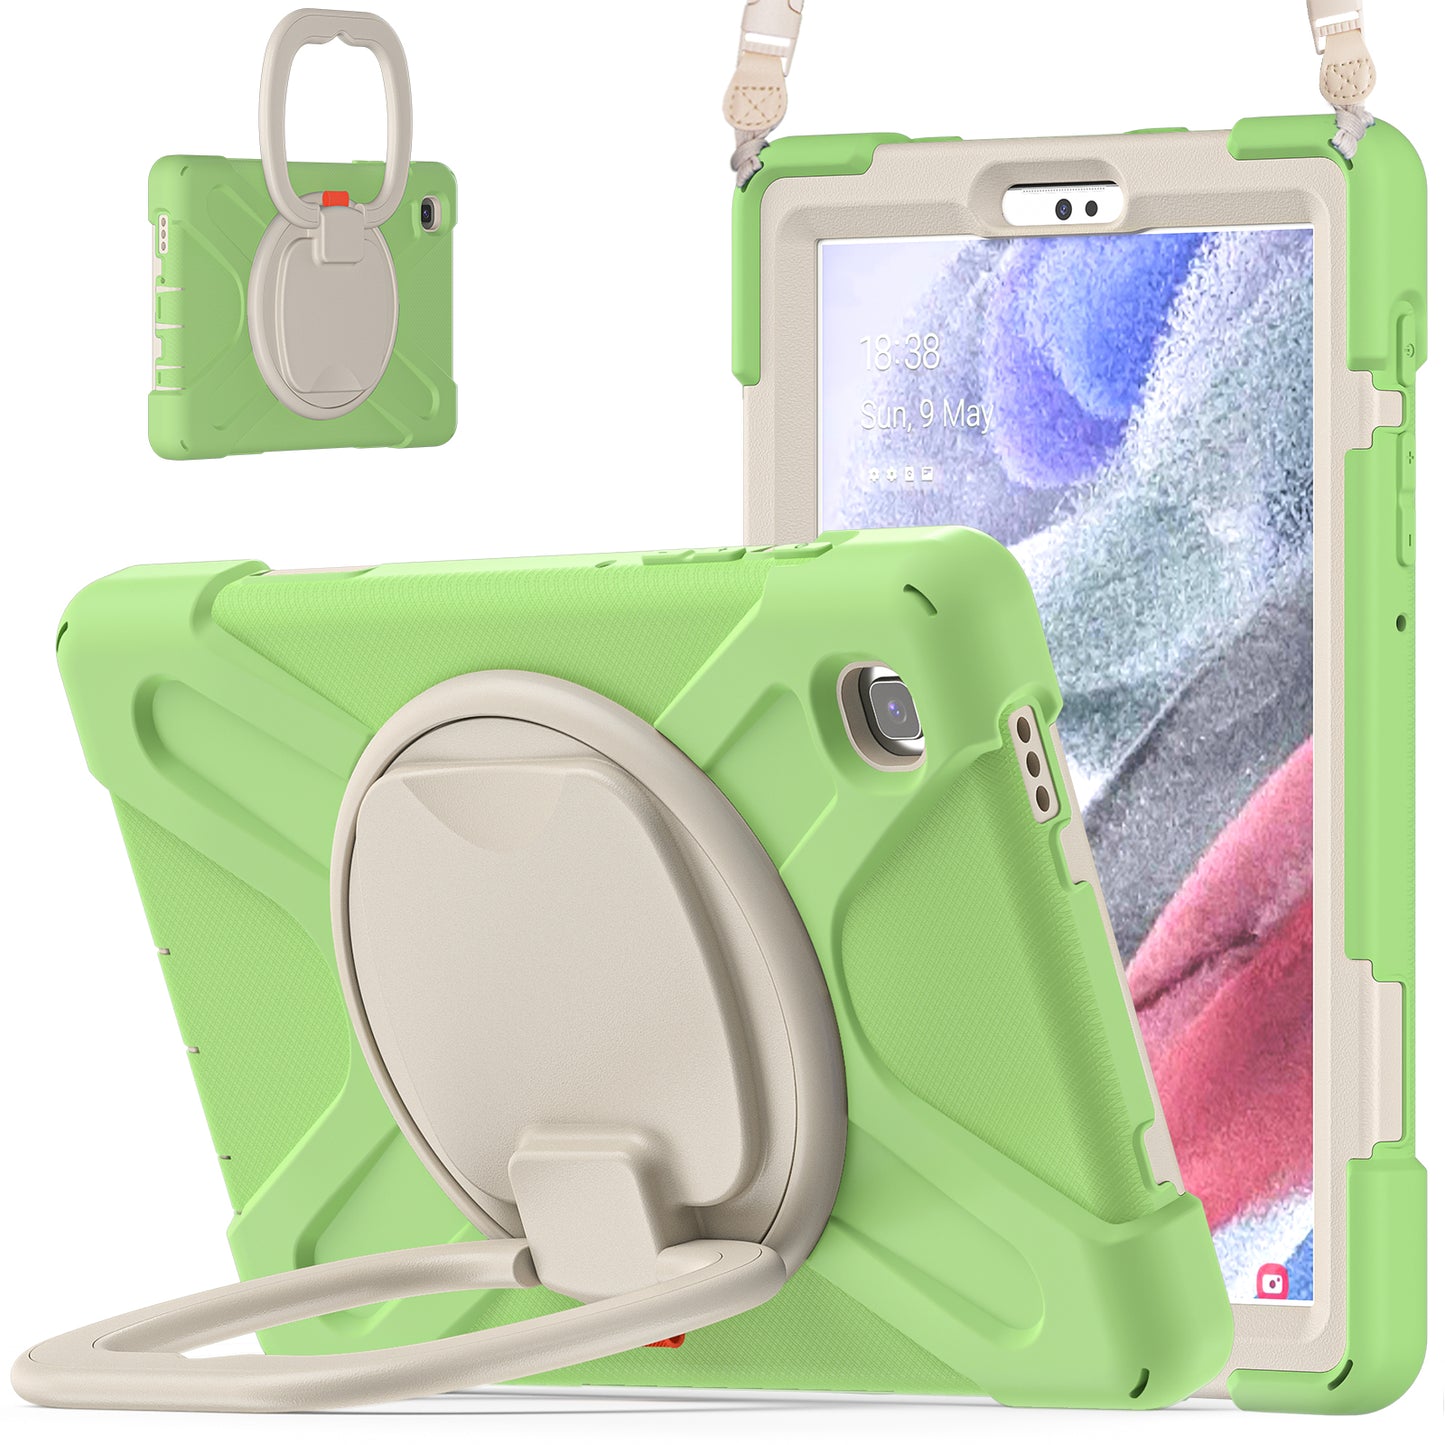 Pirate Box Galaxy Tab A7 Lite Case Hook Stand Rotating Hand Holder Shoulder Strap